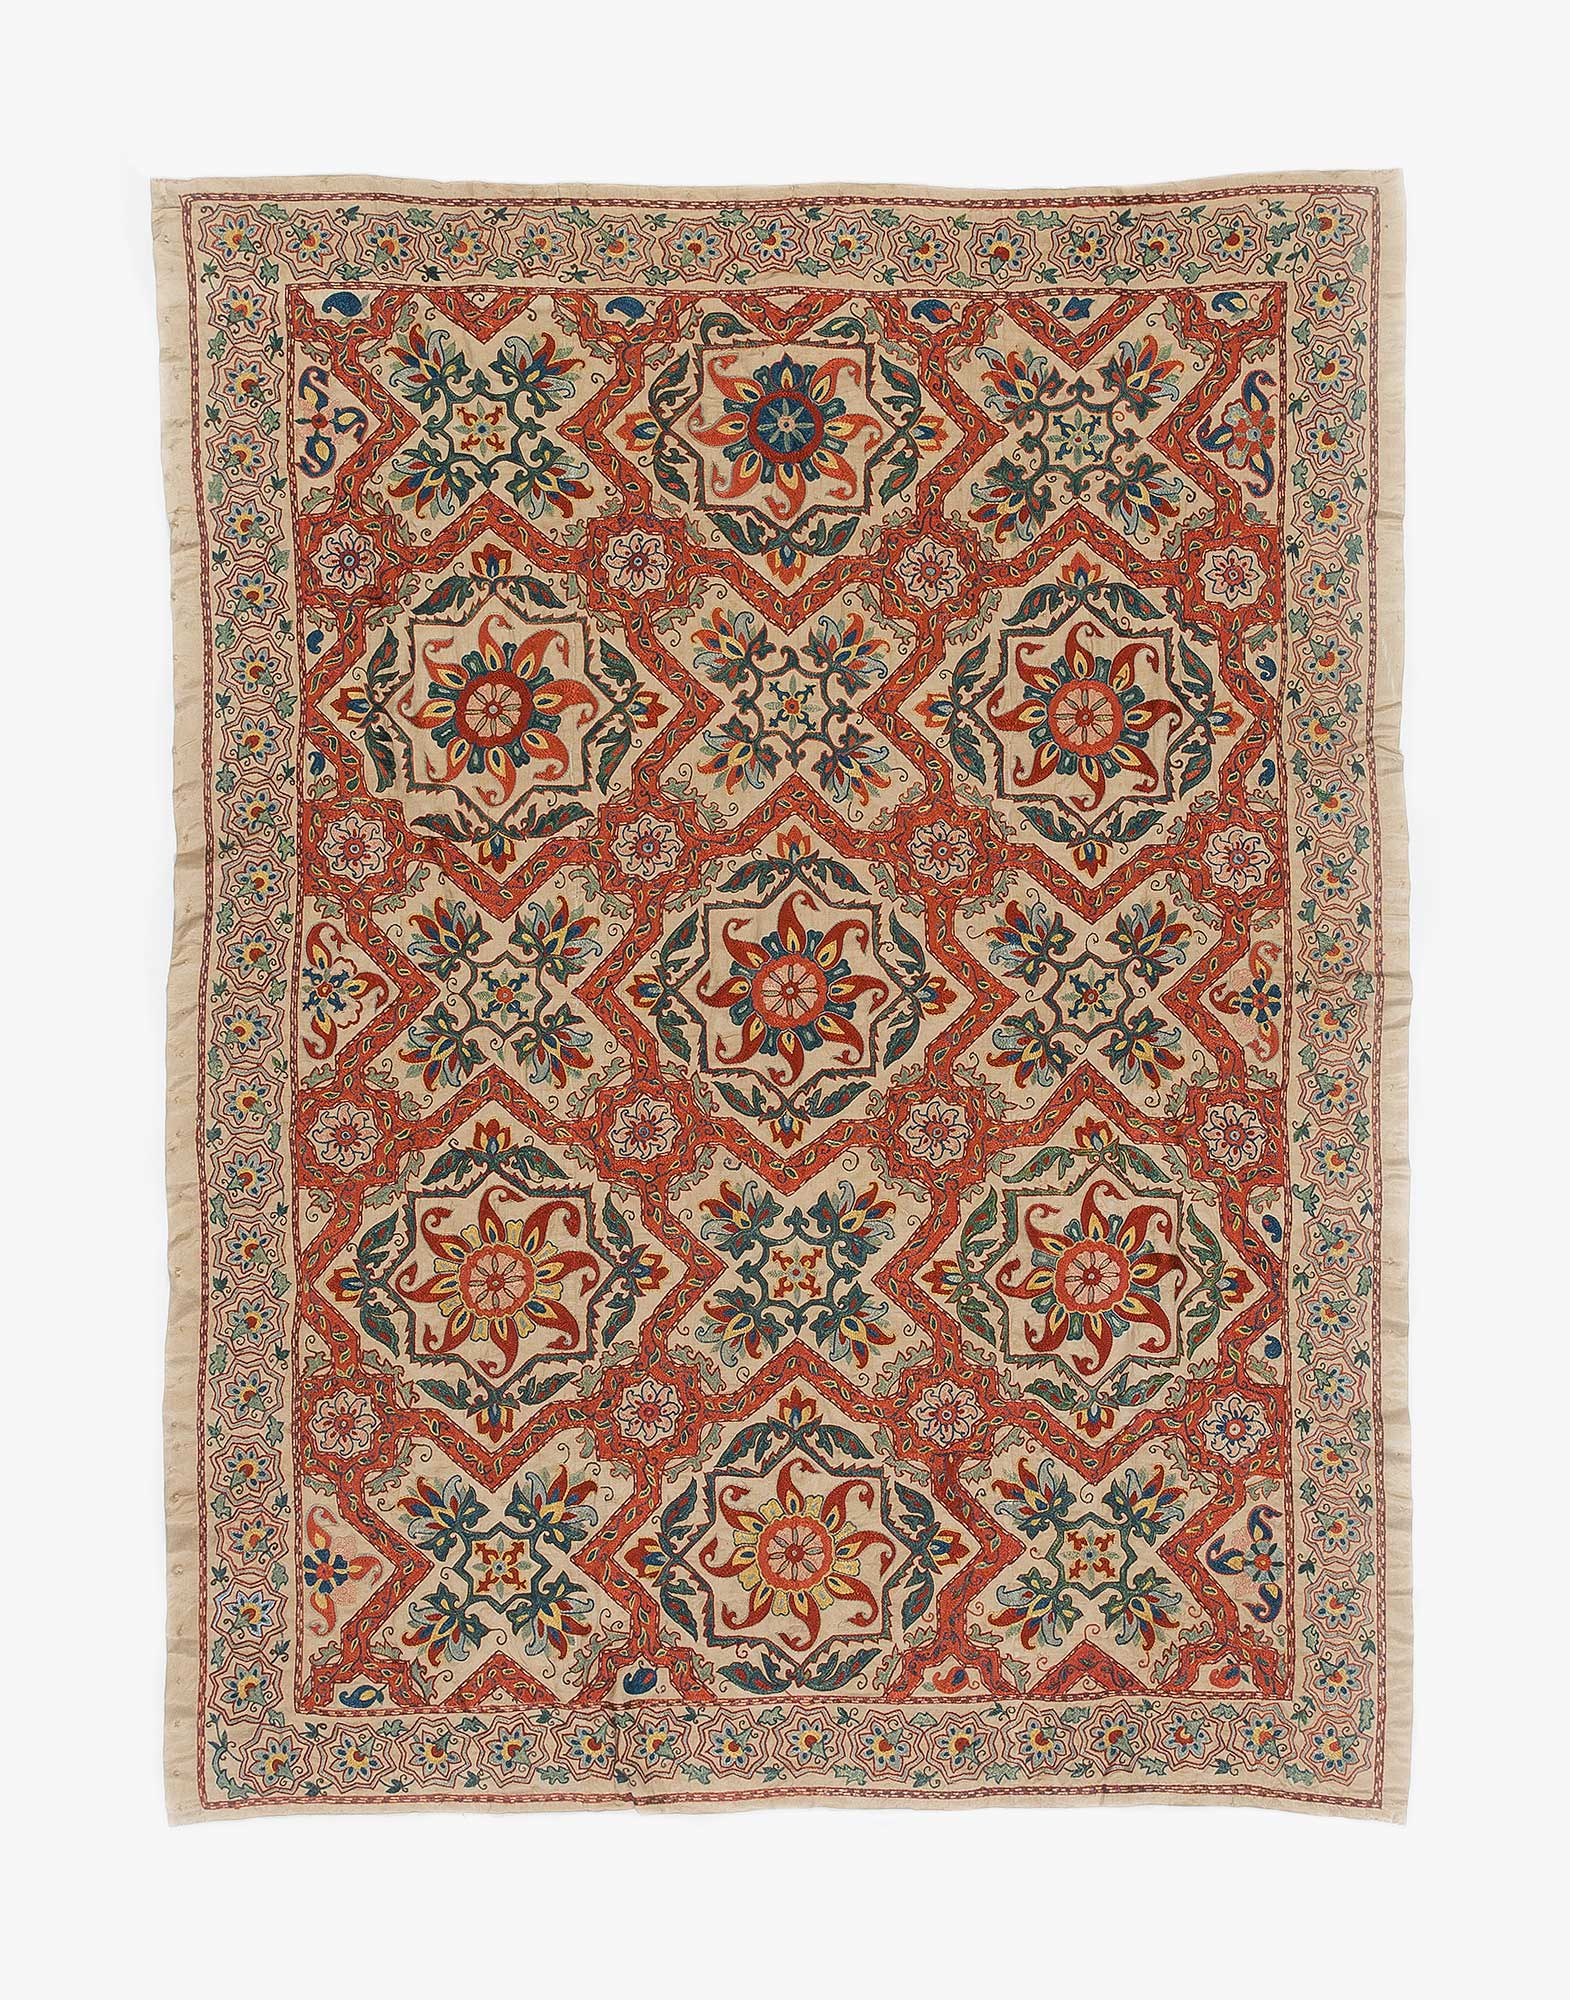 Uzbek Suzani Embroidered Silk Bed Cover